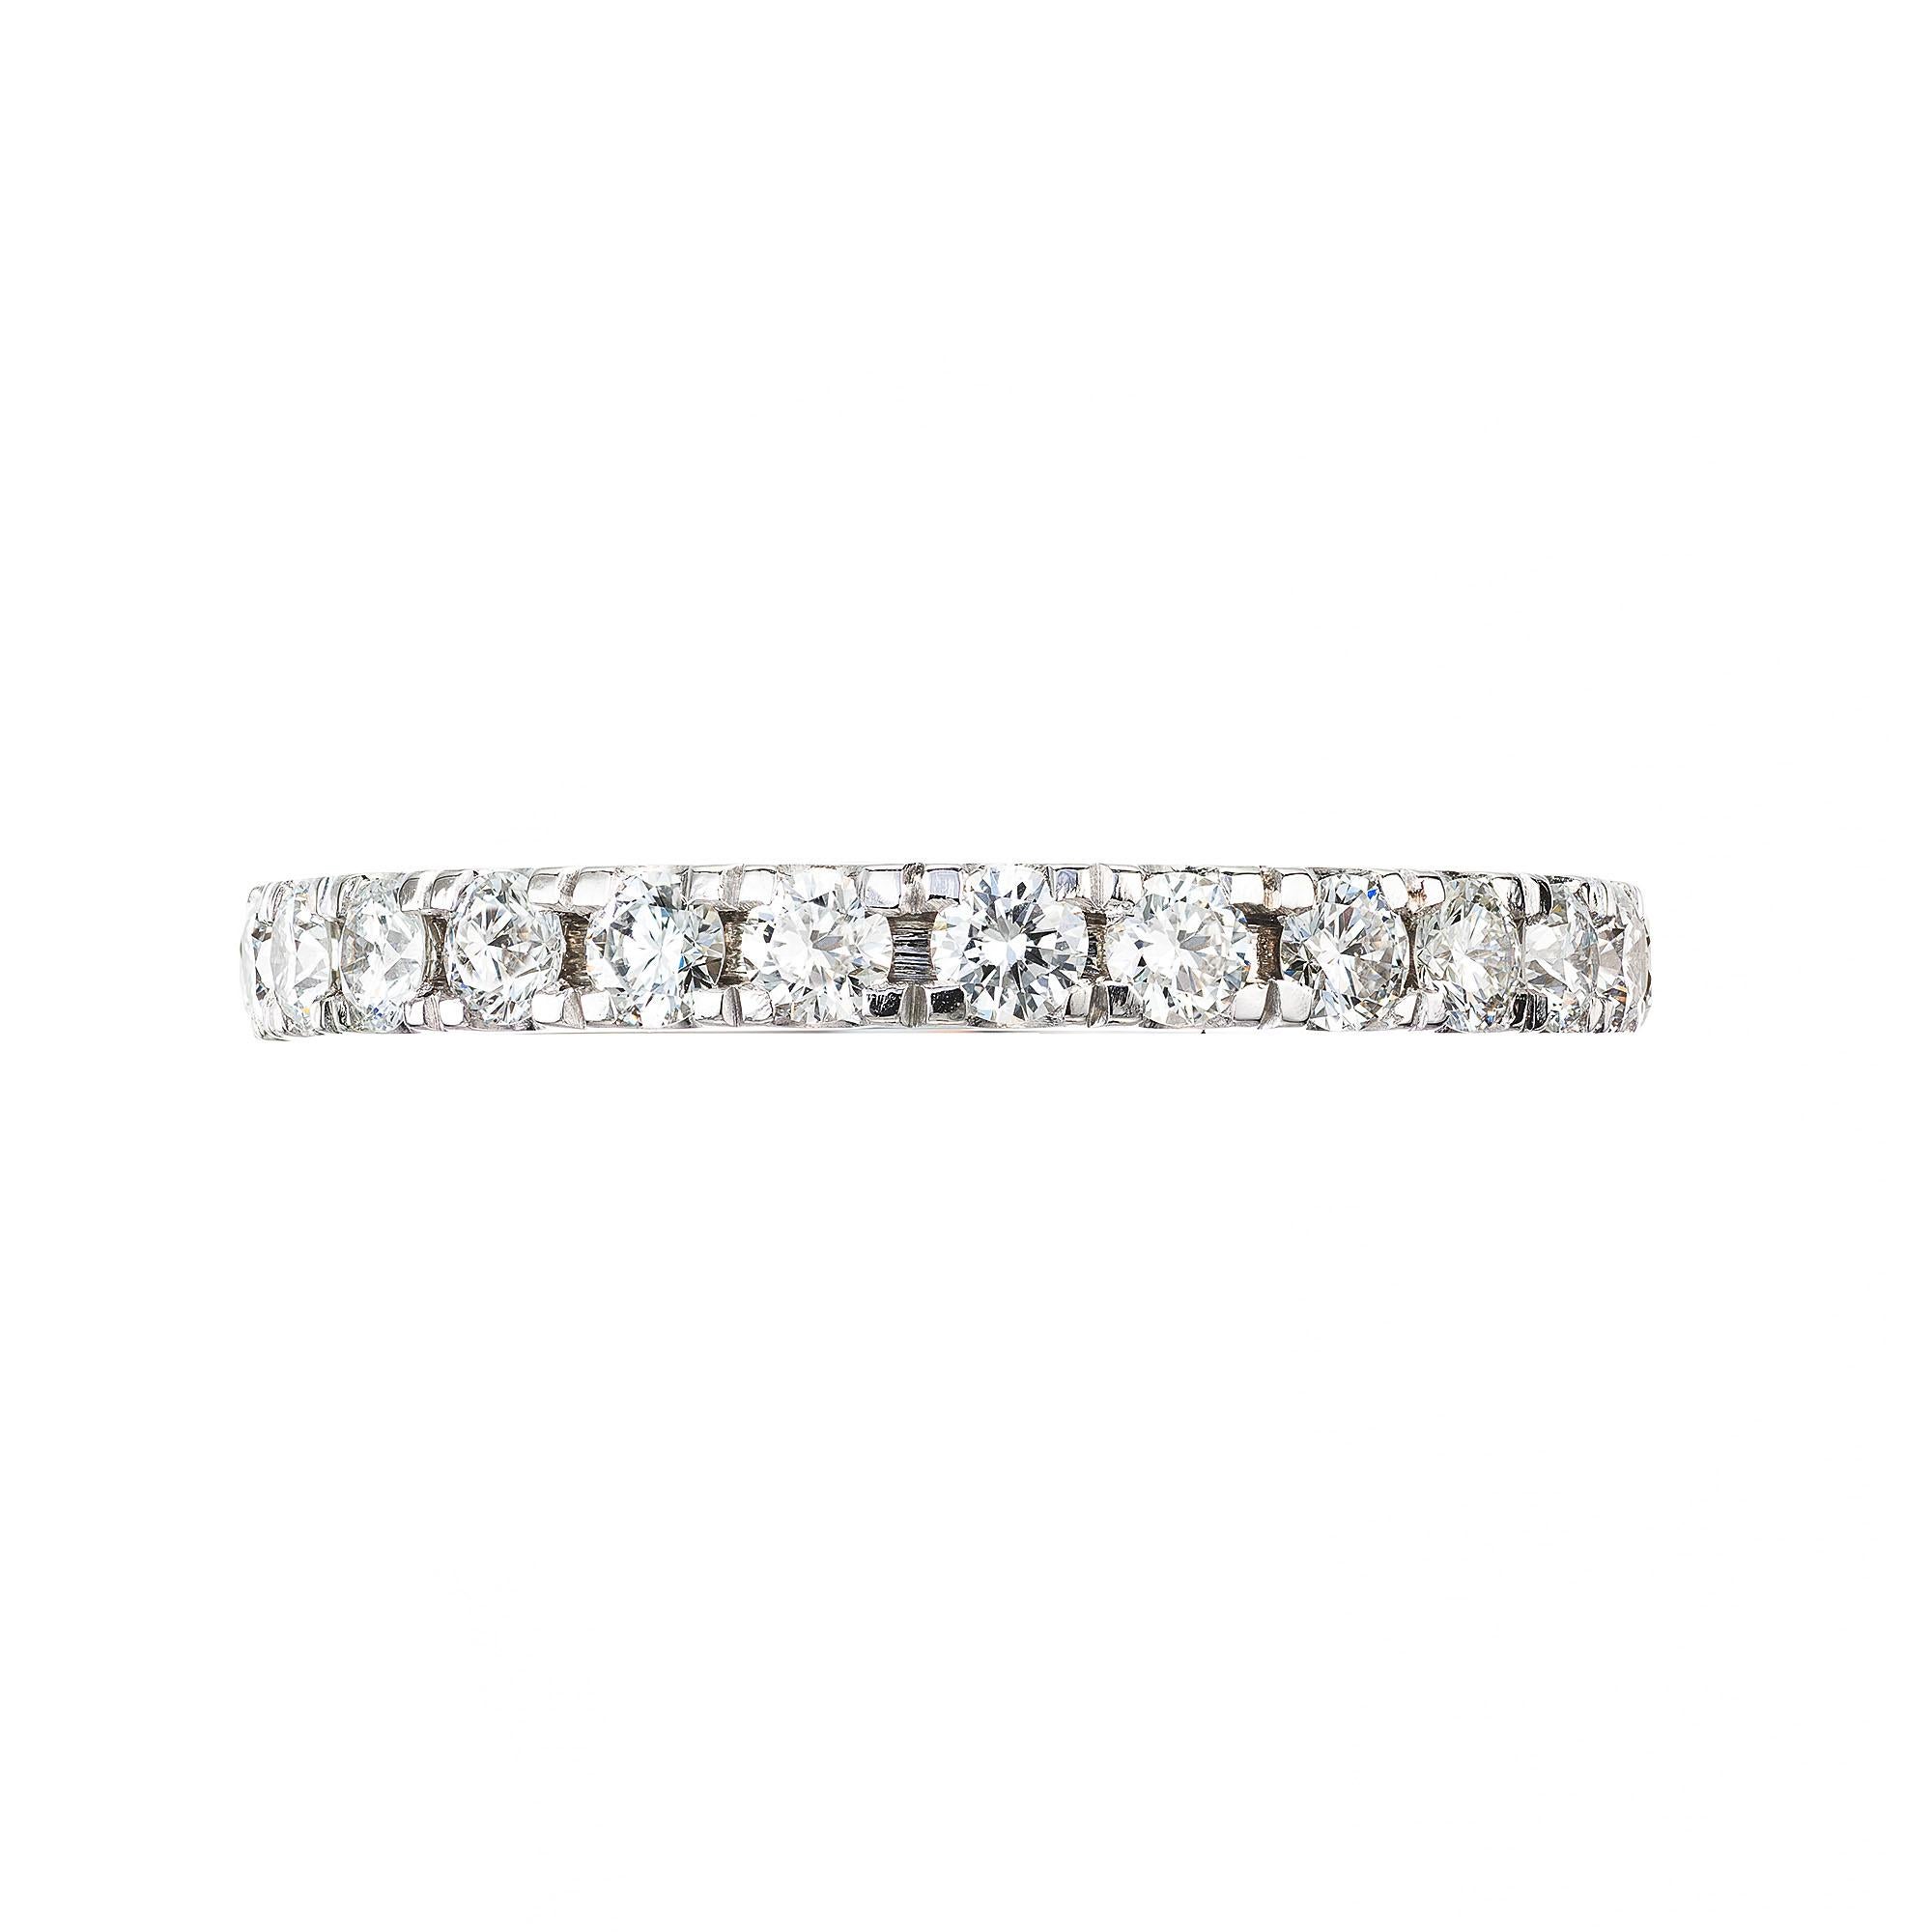 1.13 carat, 25 round diamond in a custom groove set diamond platinum eternity setting from the Peter Suchy workshop.

25 round brilliant cut diamond F-G VS, approx. 1.13ct
Size 6.5 and sizable (order only)
Platinum 
Stamped: PLAT
4.4 grams
Width at